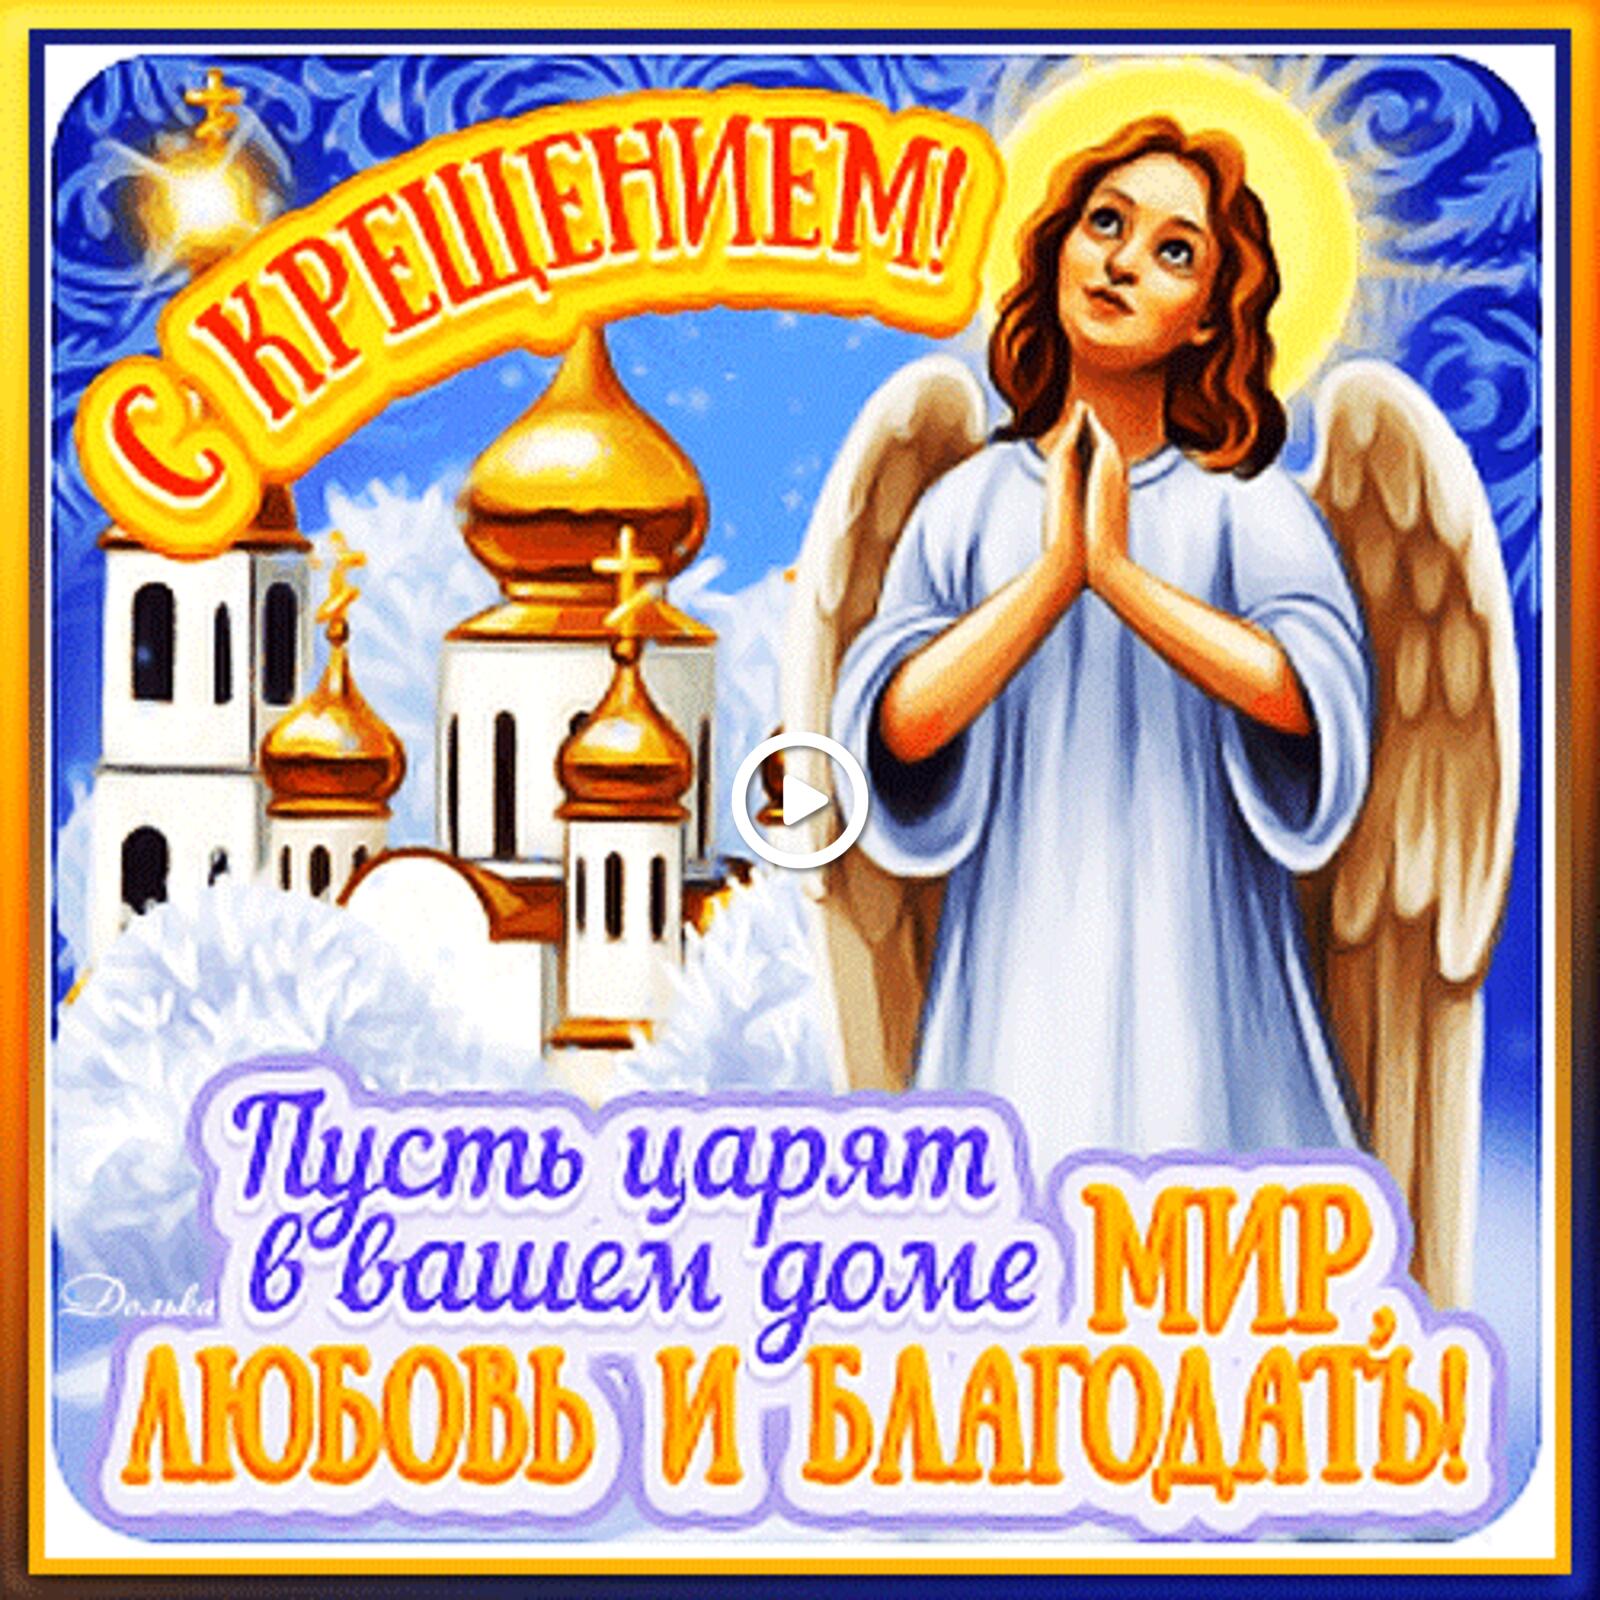 A postcard on the subject of with a baptism angel church for free